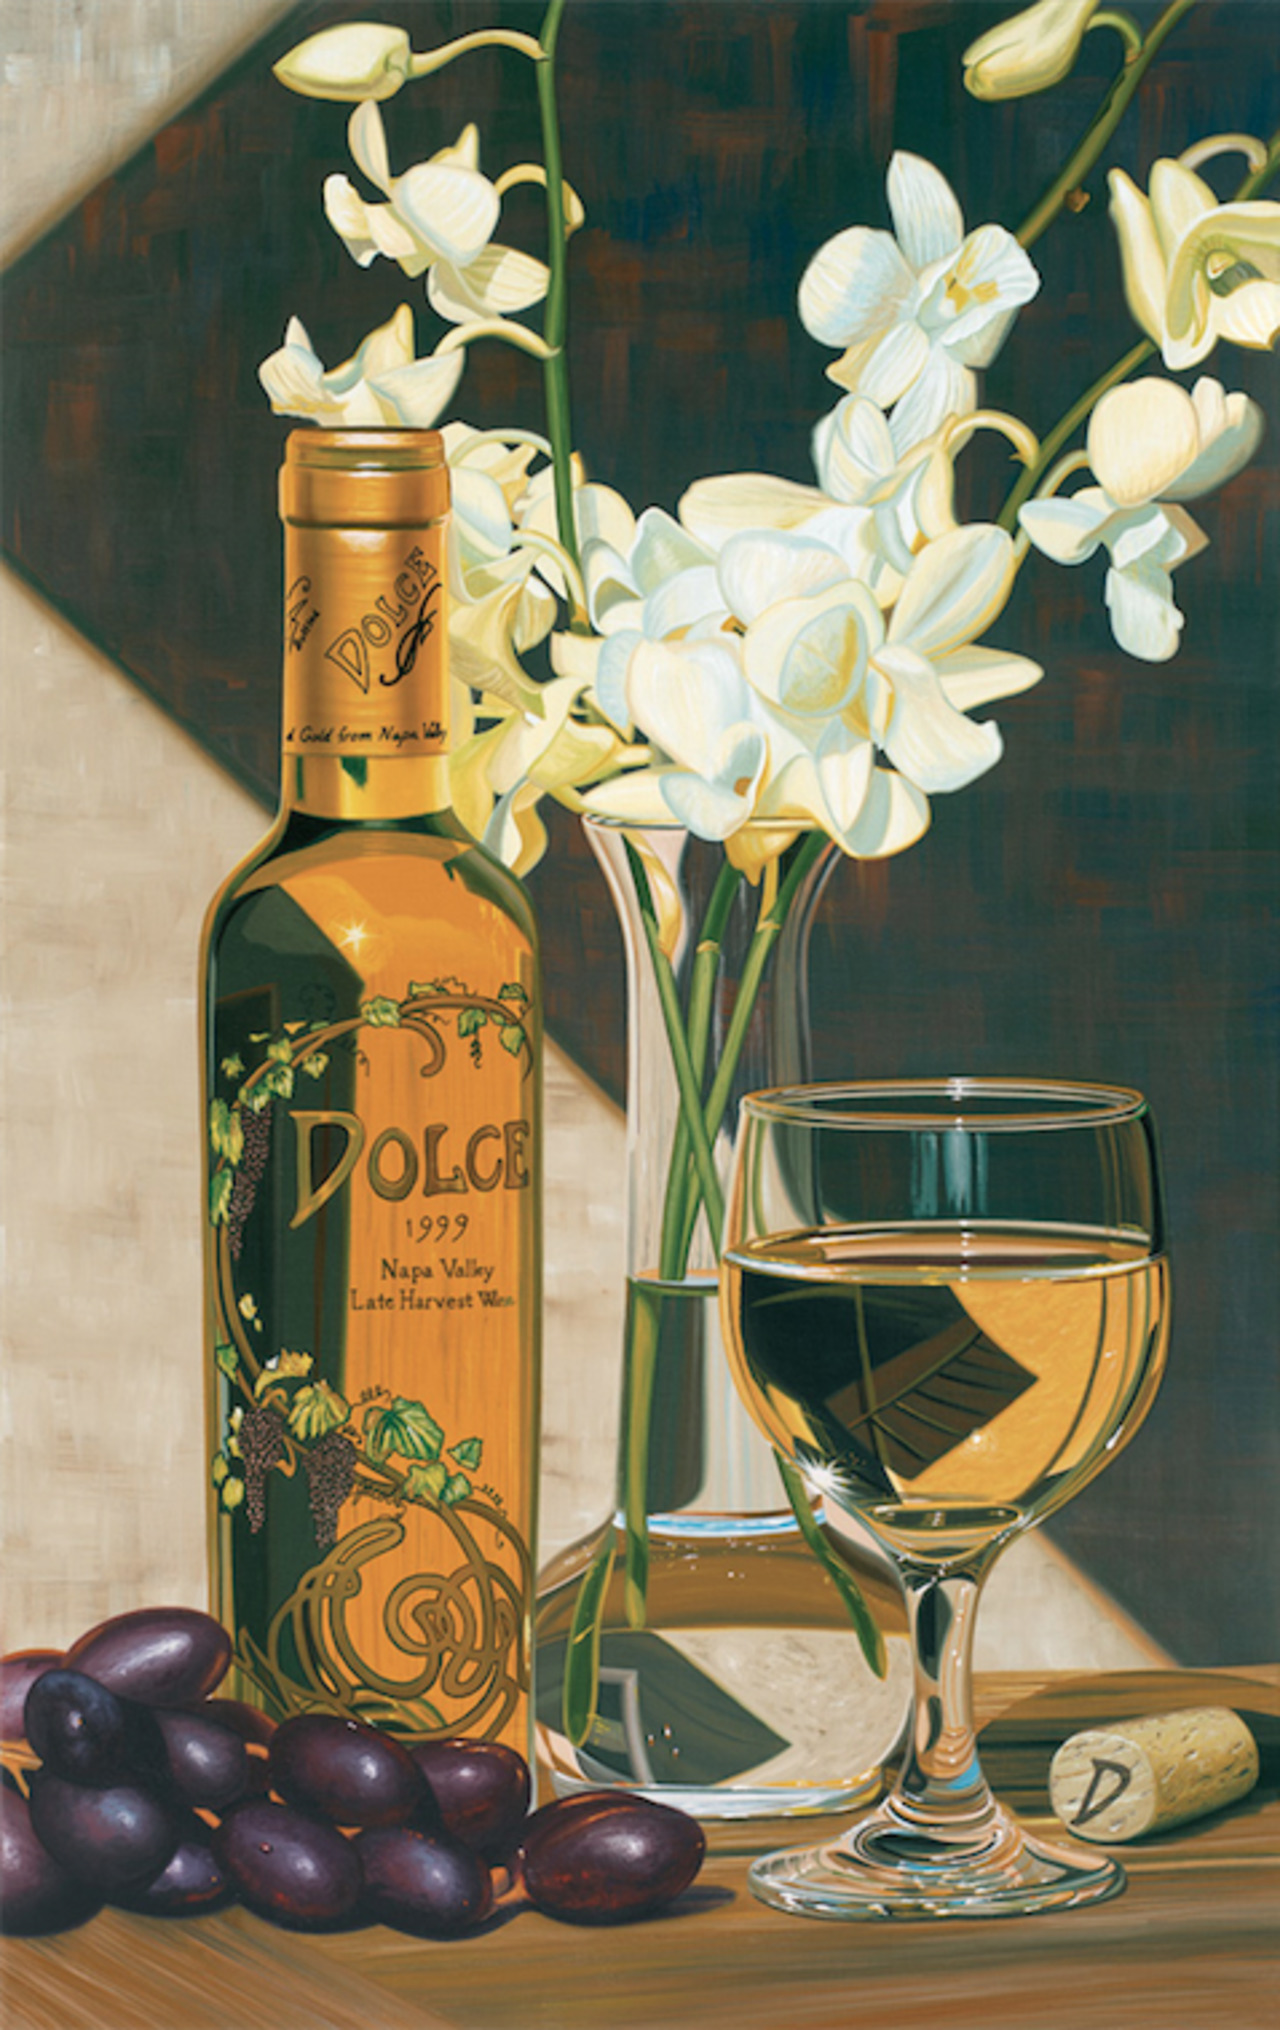 Painting of the Day: "Dolce"
24 x 38" / 30 in the edition. #art #artist #Dolce #wine http://t.co/JzRm7Sjk92